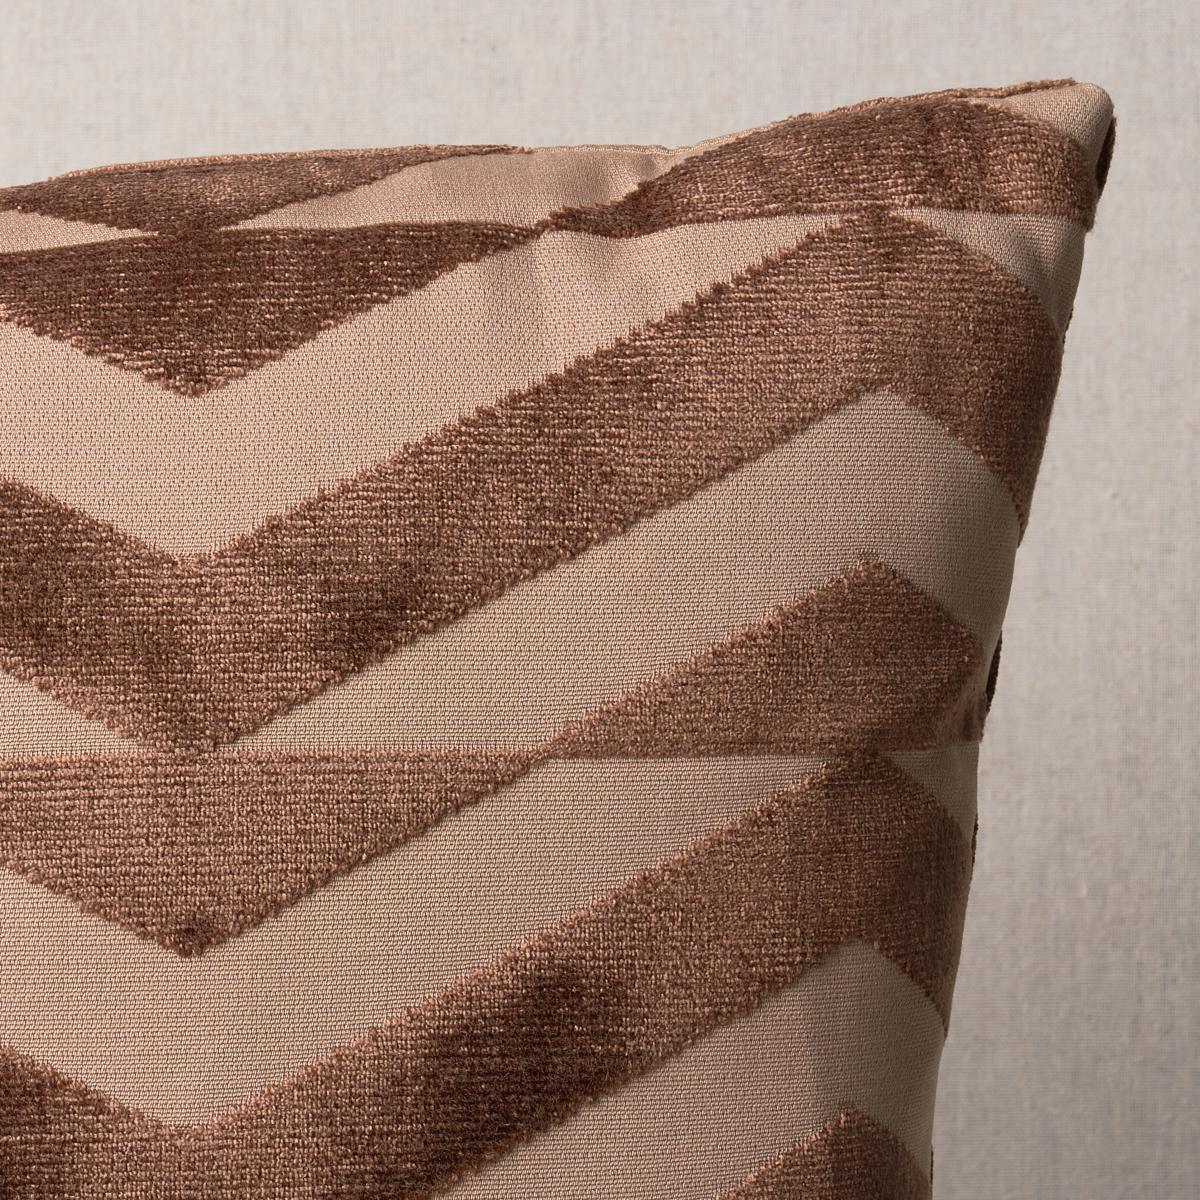 This pillow features Broken Chevron Cut Velvet by Miles Redd for Schumacher with a knife edge finish. Miles Redd was so charmed by a painted staircase photographed from above that he recreated it as brown-on-camel-colored Broken Chevron Velvet, a